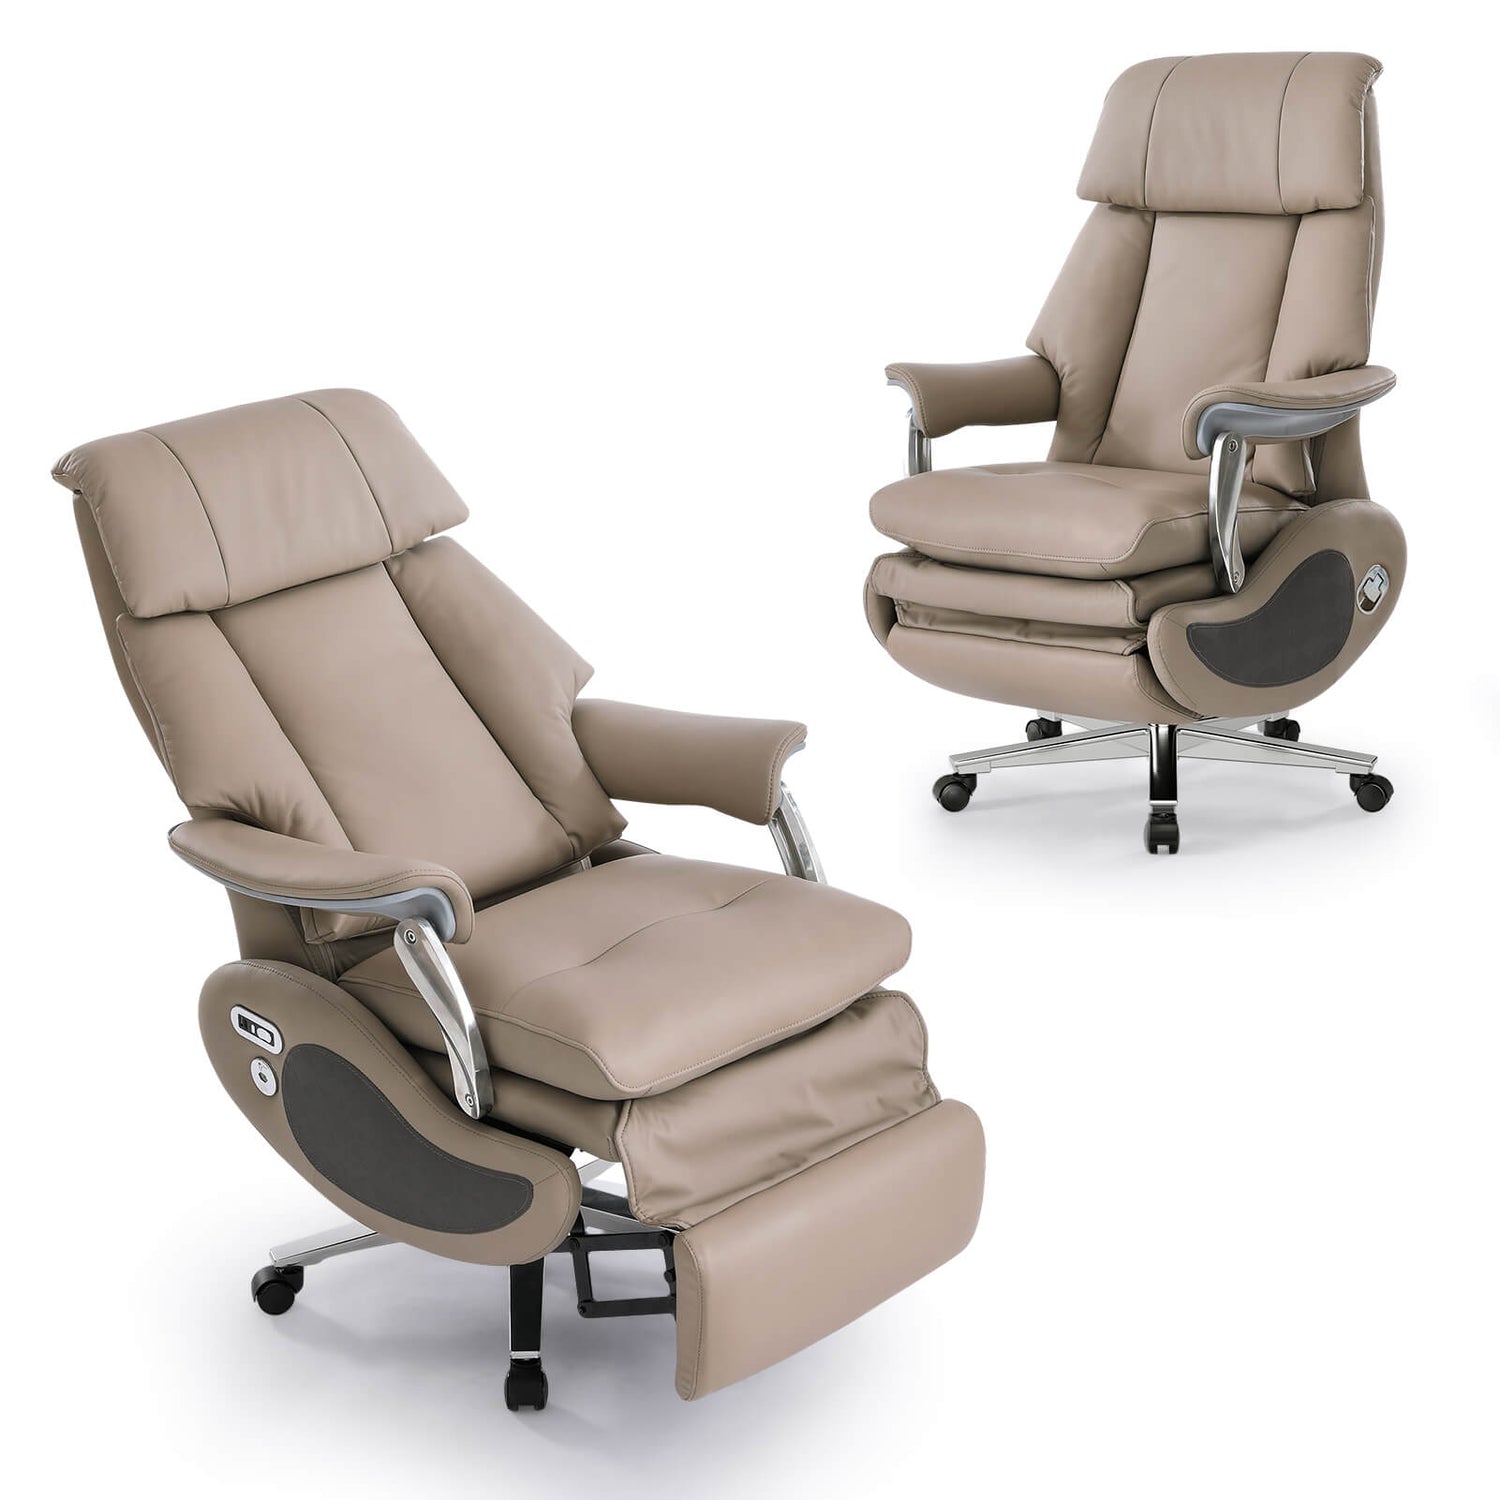 EMIAH M029 Electric Smart Executive Office Chair